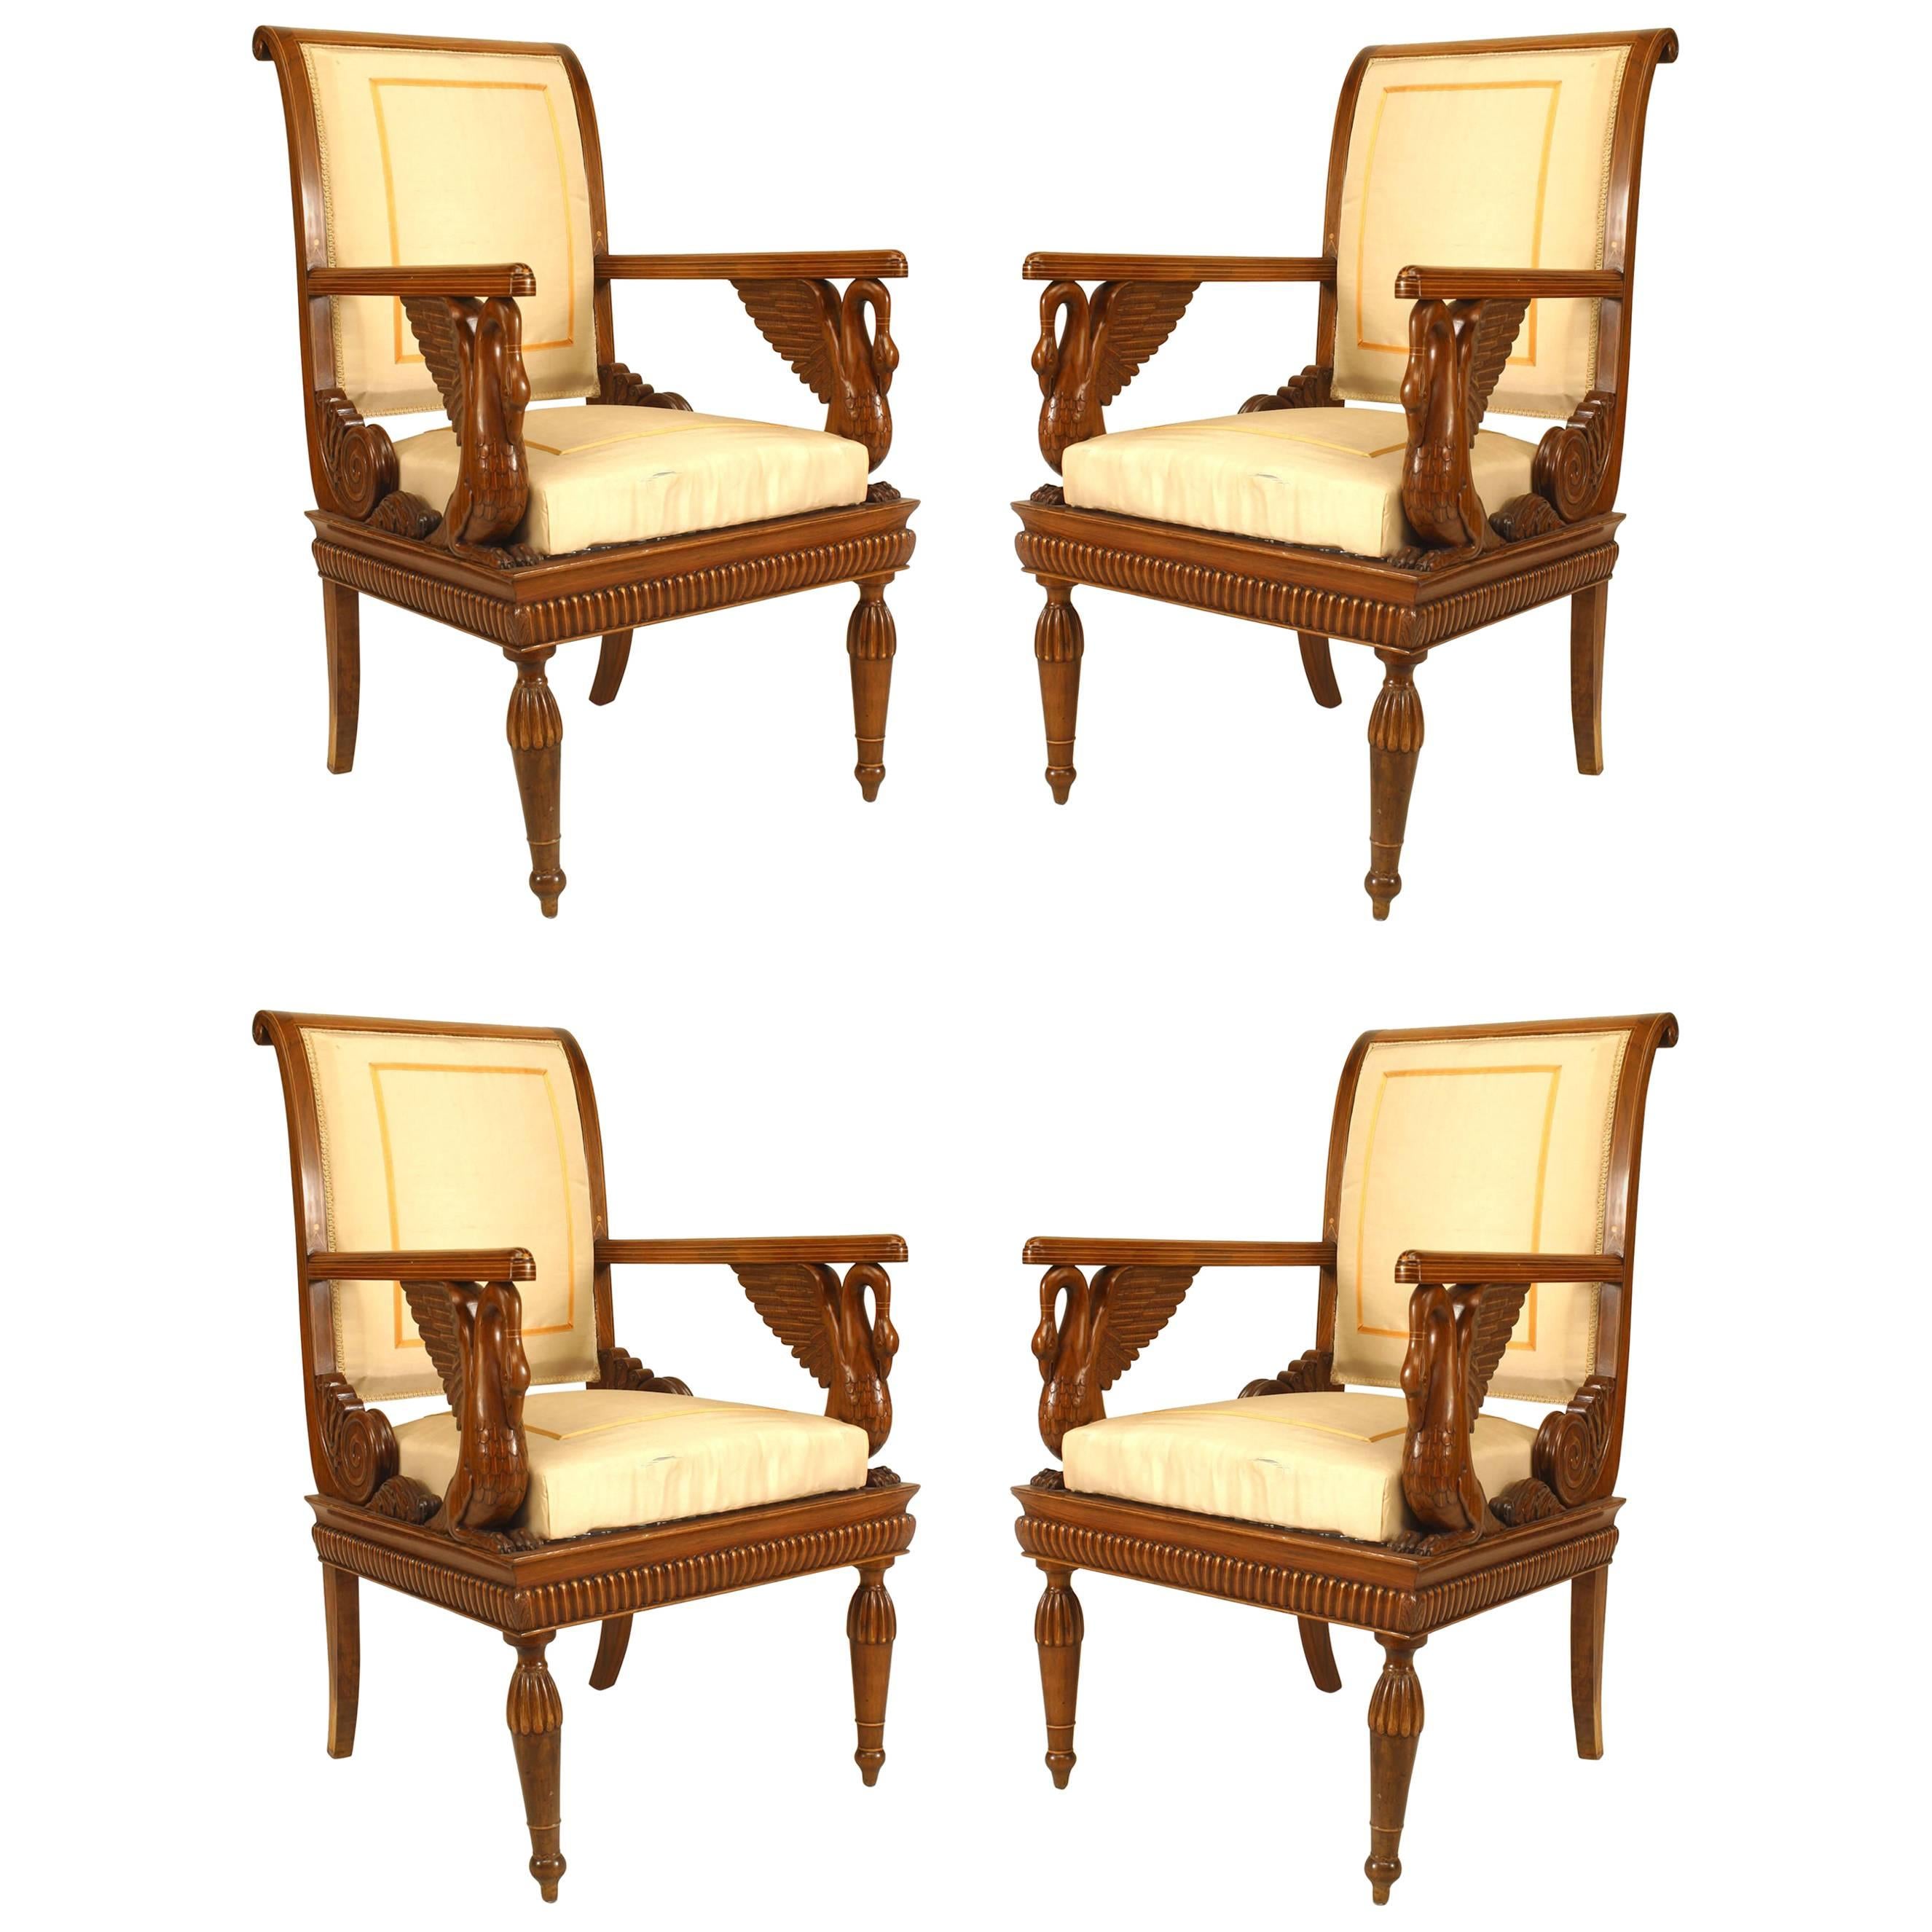 Set of 4 Austrian Neoclassic Fruitwood Arm Chairs